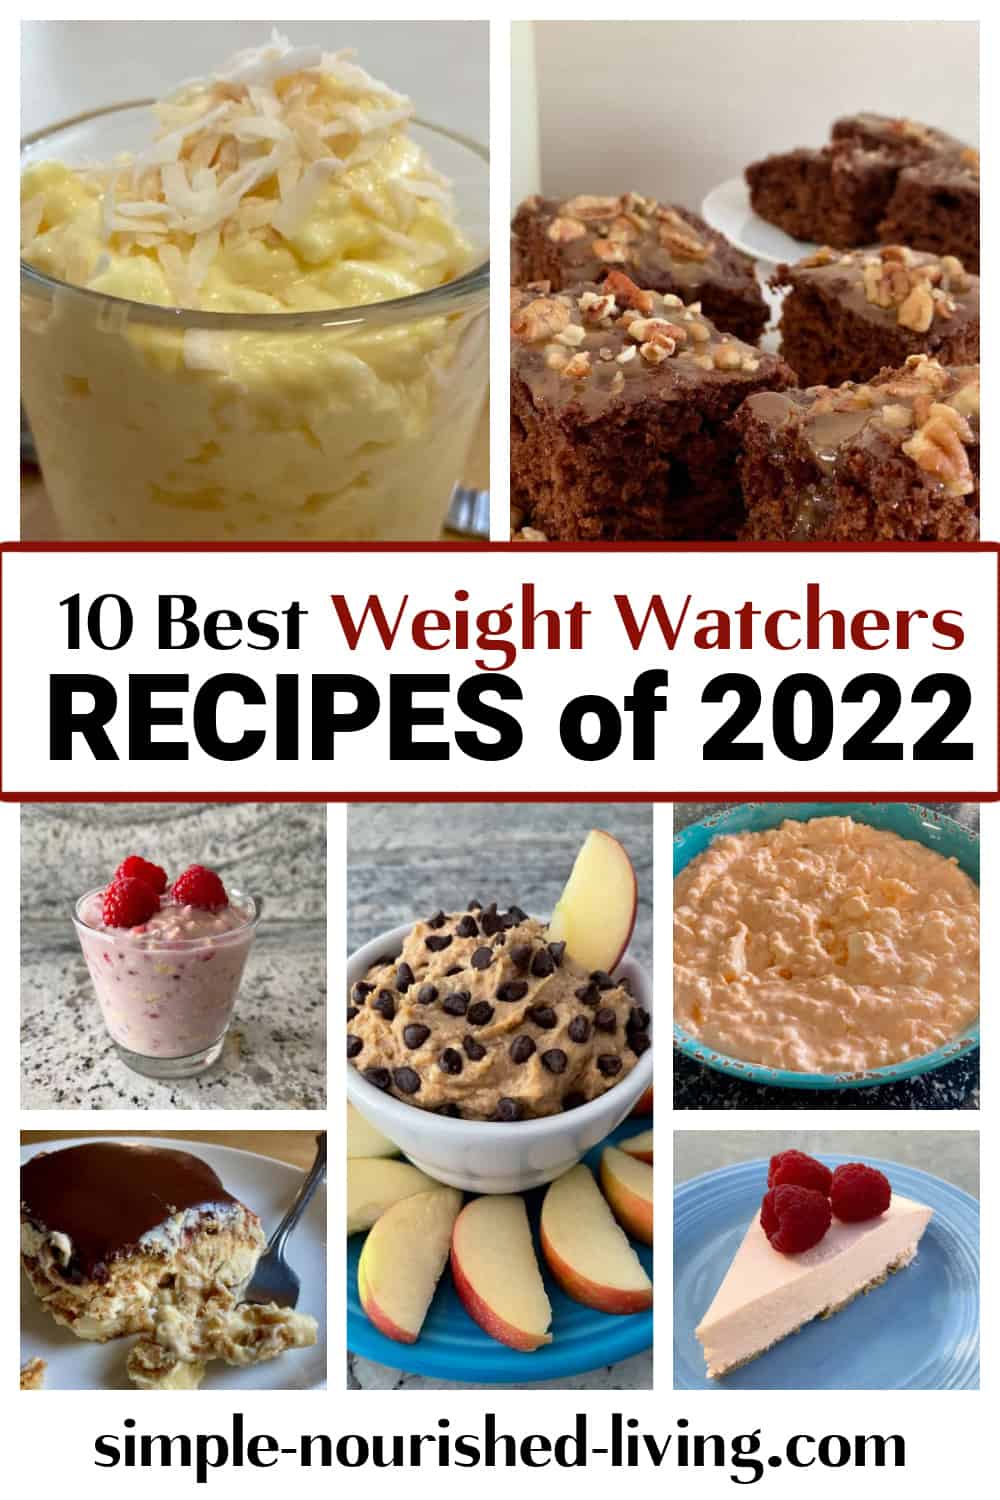 food collage with text: 10 Best Weight Watchers Recipes 2022